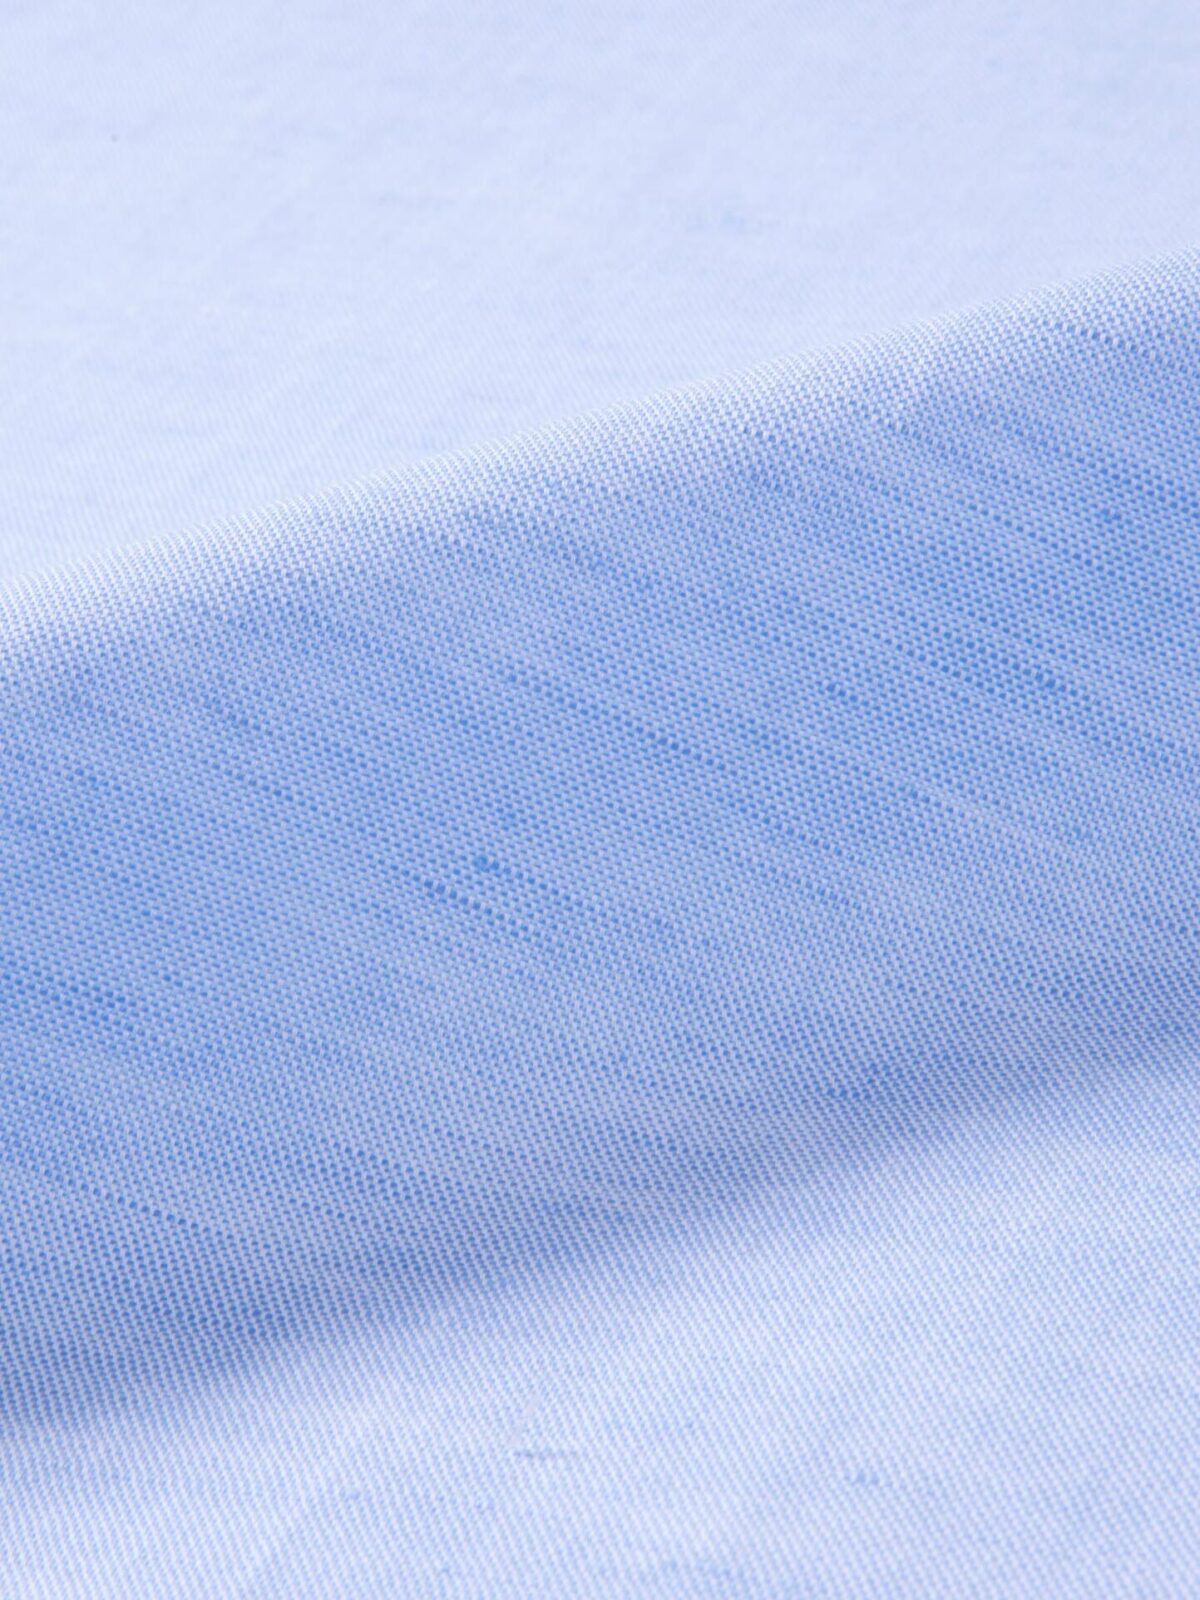 Portuguese Light Blue Cotton and Linen Oxford Shirts by Proper Cloth